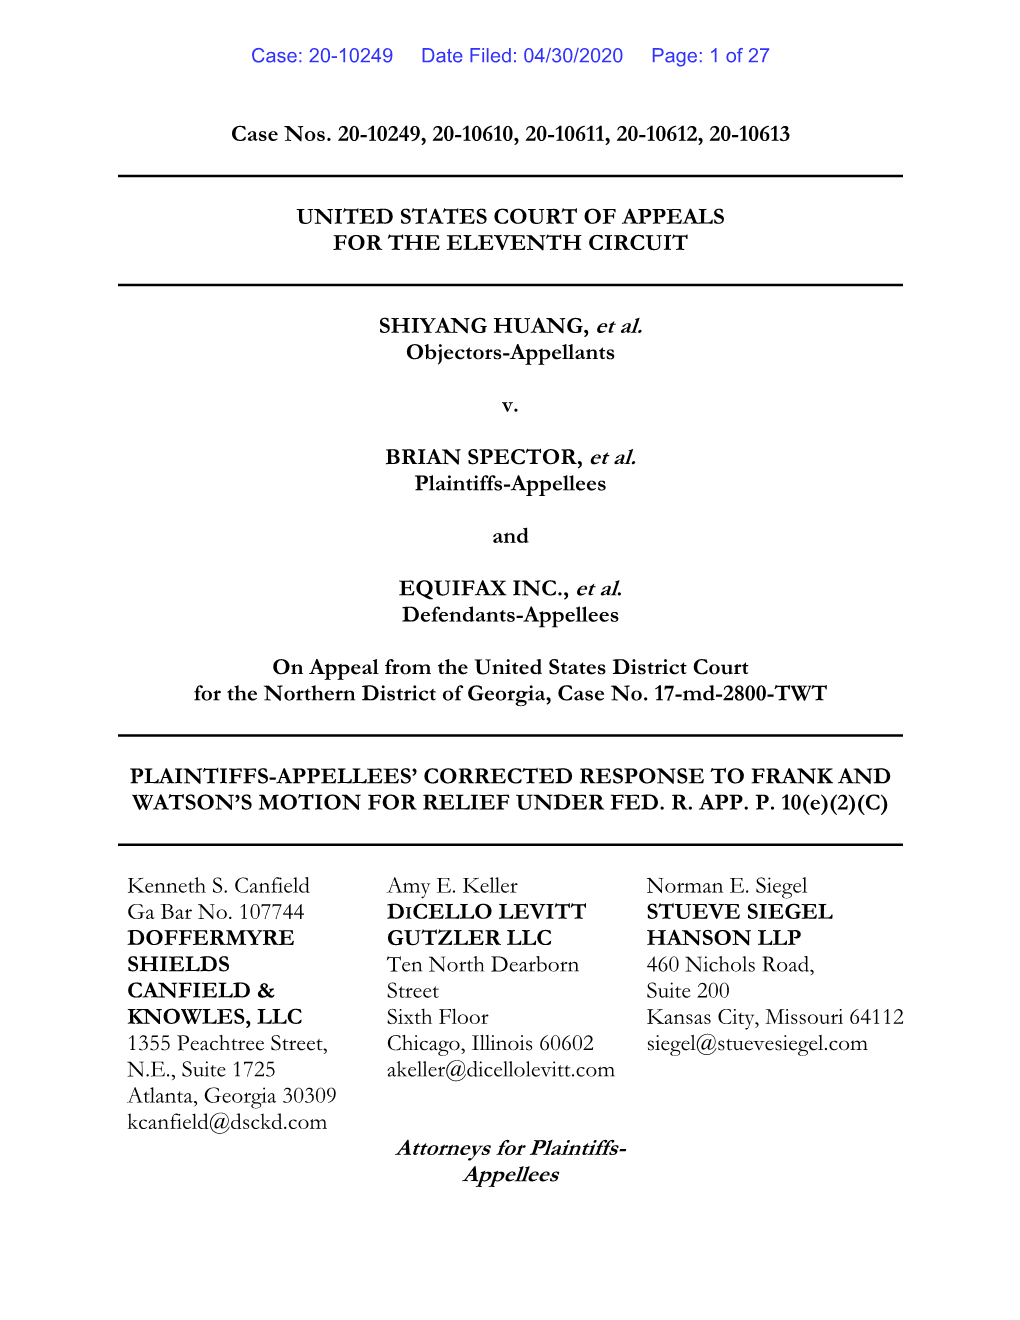 Attorneys for Plaintiffs- Appellees Case: 20-10249 Date Filed: 04/30/2020 Page: 2 of 27 Case Nos